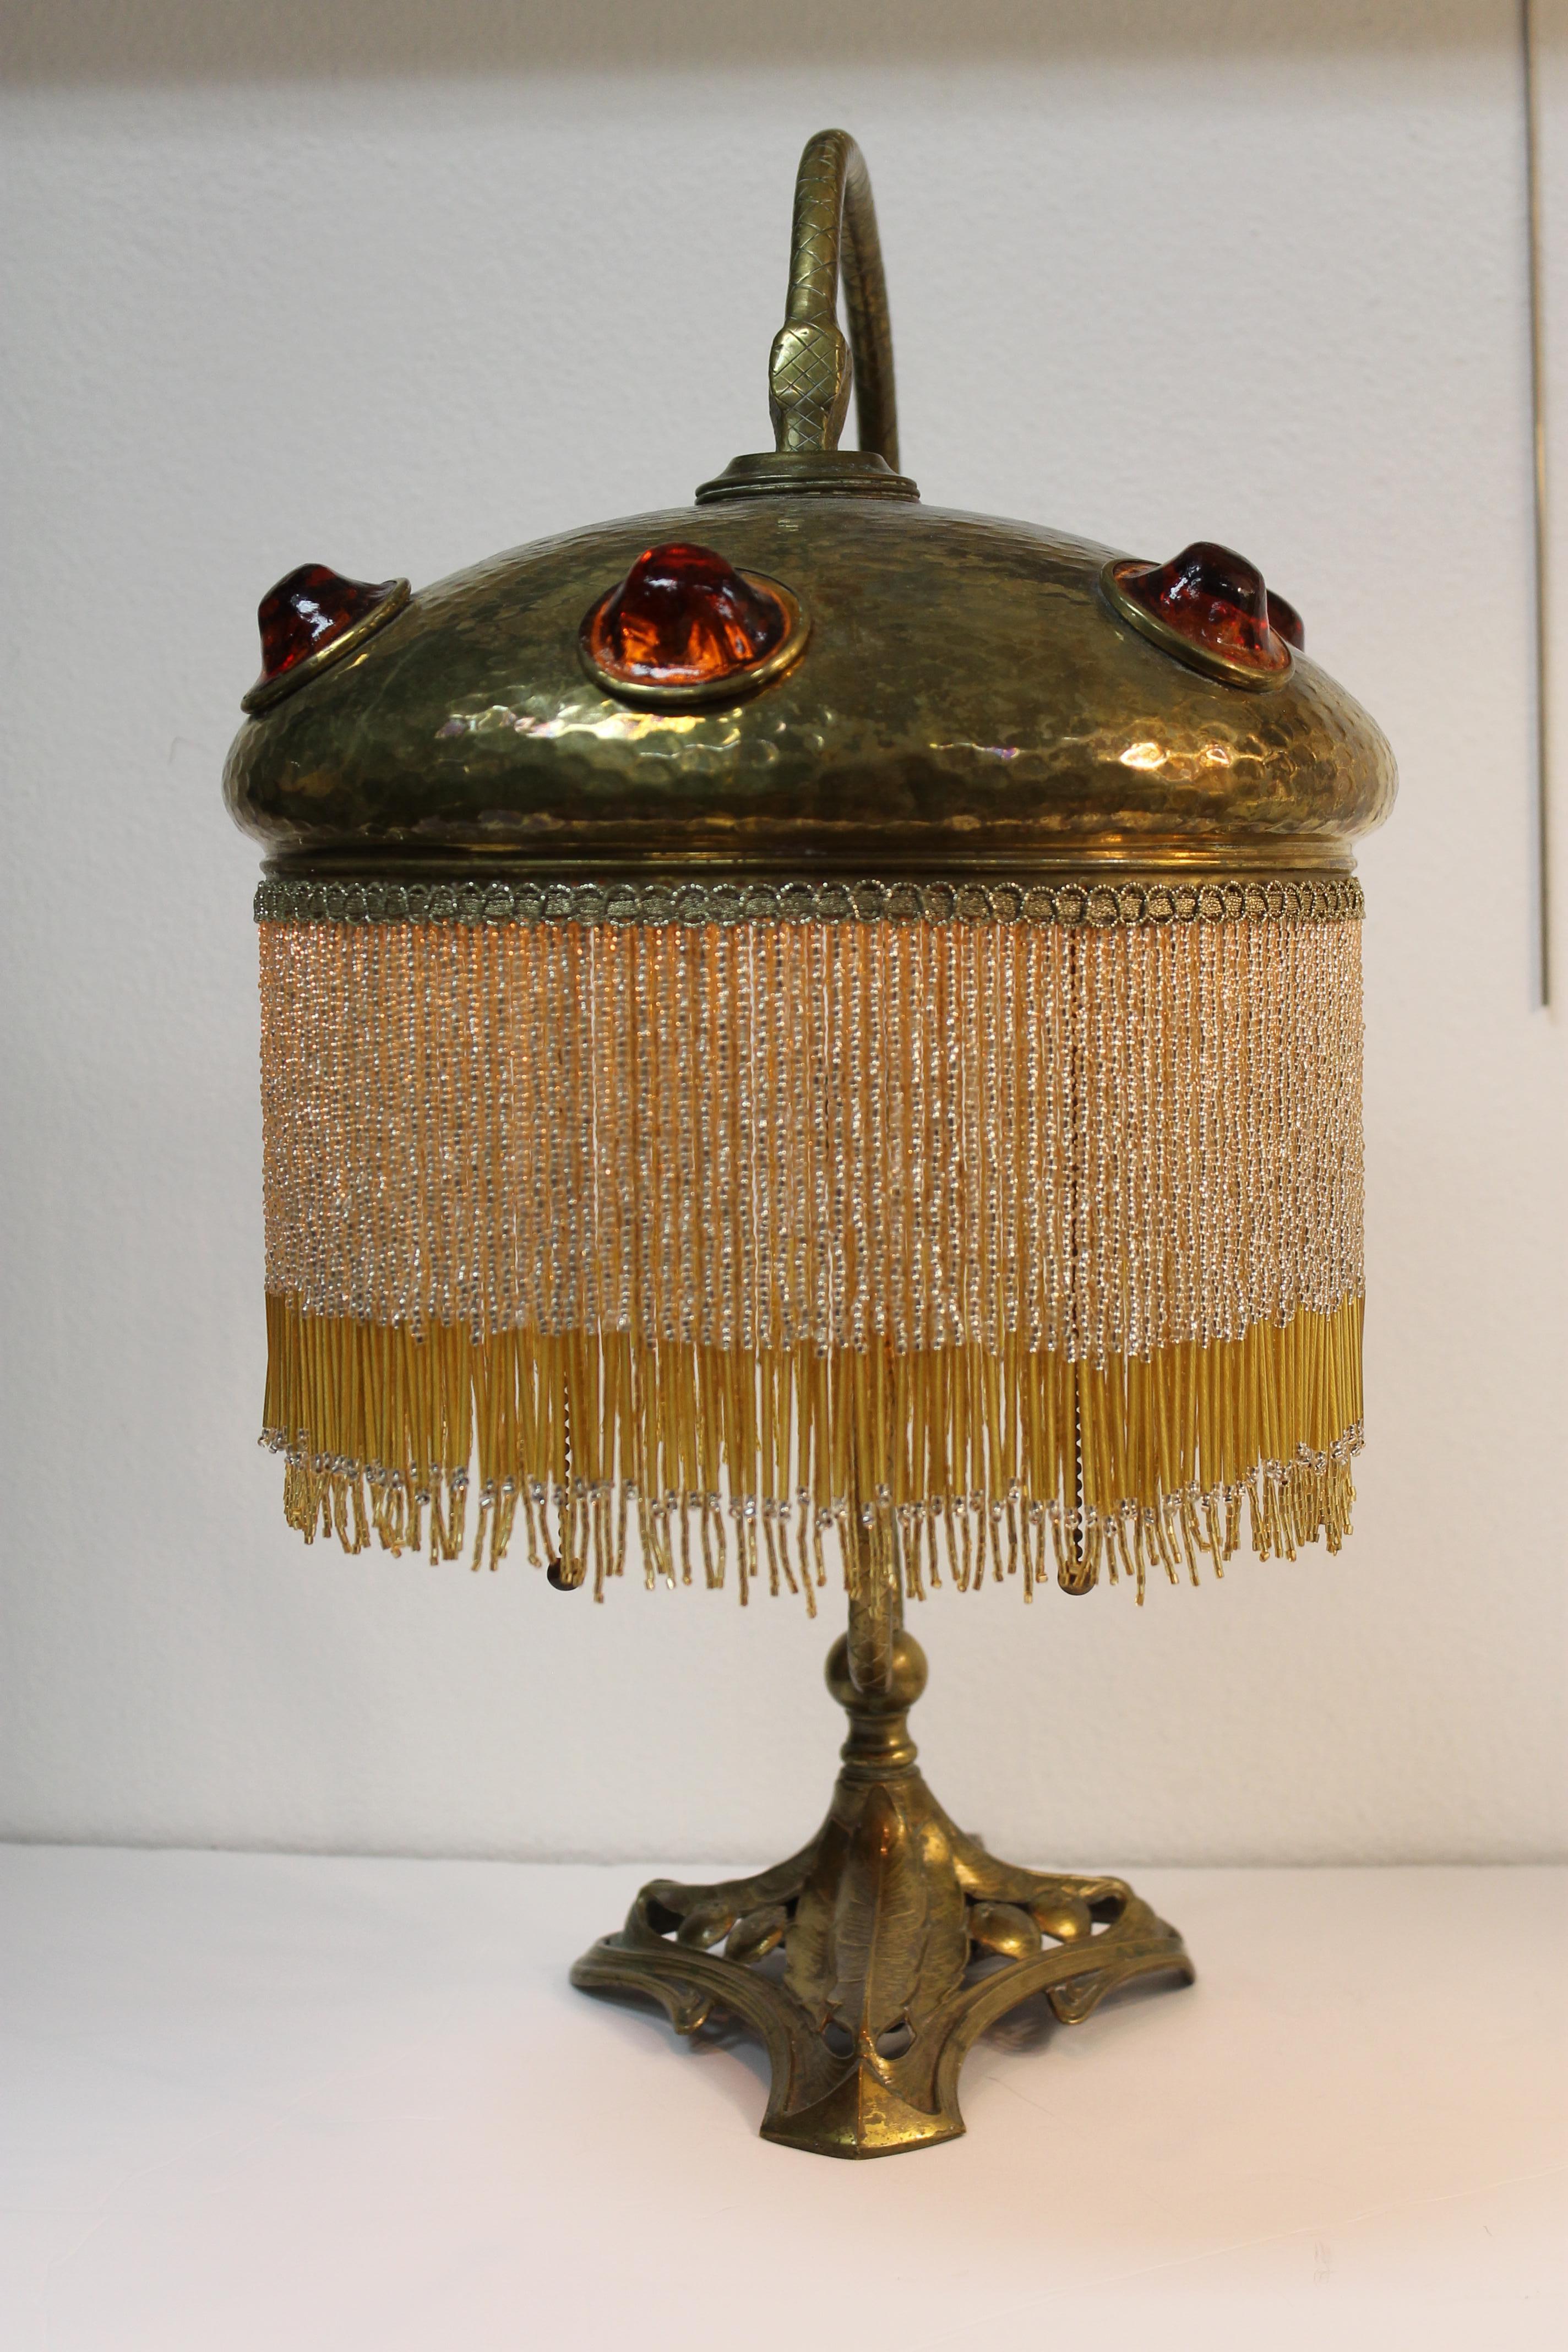 An early 20th century solid brass lamp with a coiled snake or serpent holding the shade. Shade is set with large amber nuggets of glass. Measurements are 20.5